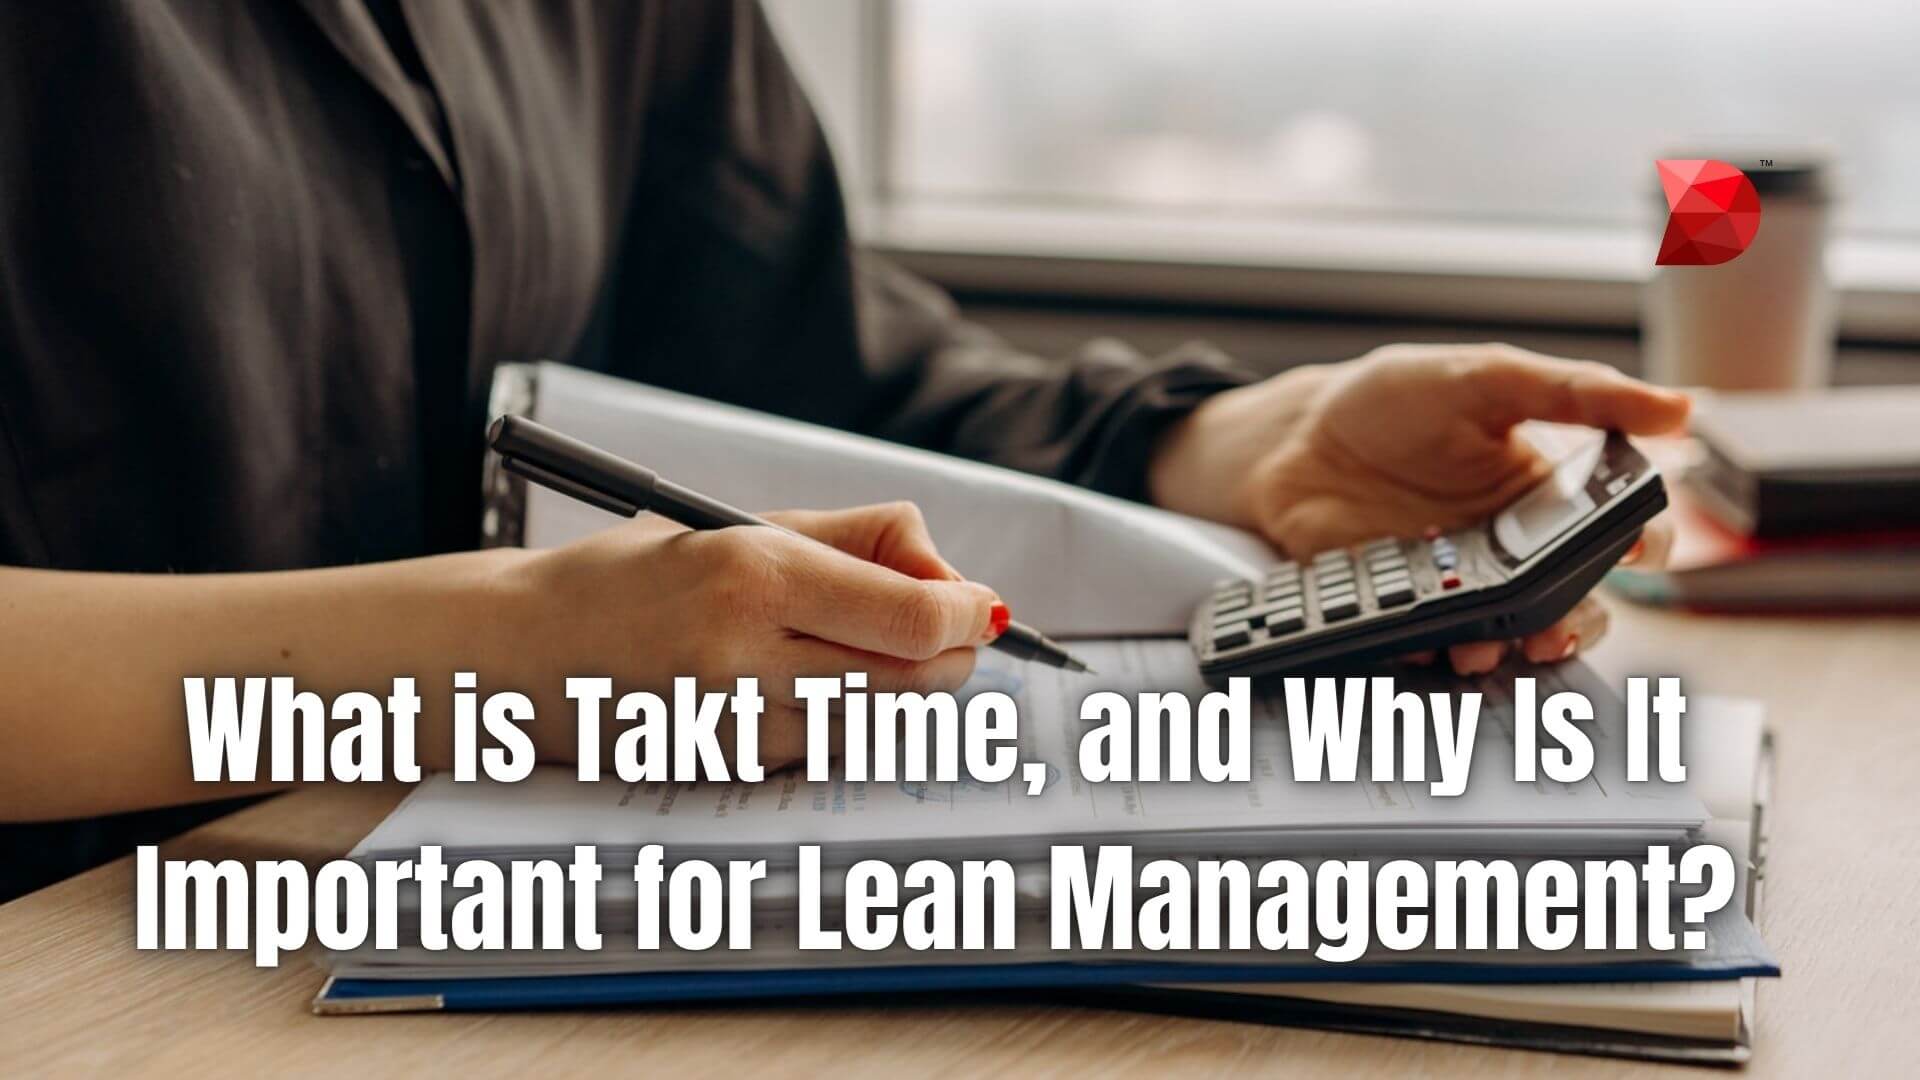 What is Takt Time, and Why Is It Important for Lean Management